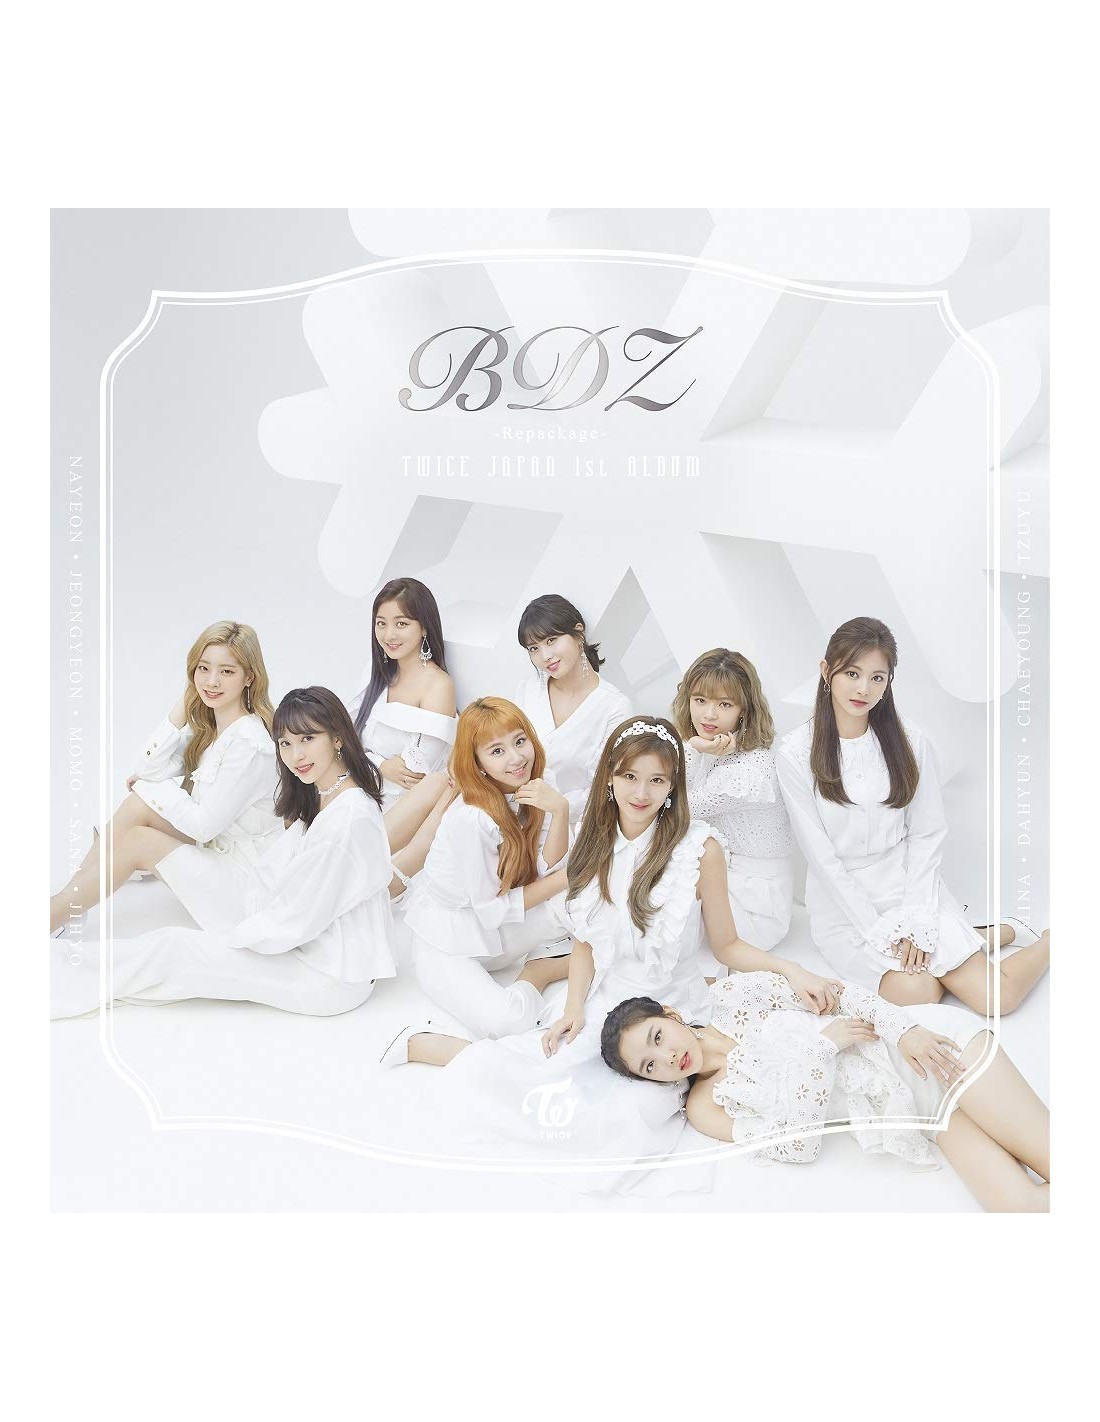 [Japanese Edition] TWICE Japan Album - BDZ Repackage(1st Limited Edition)  CD + DVD